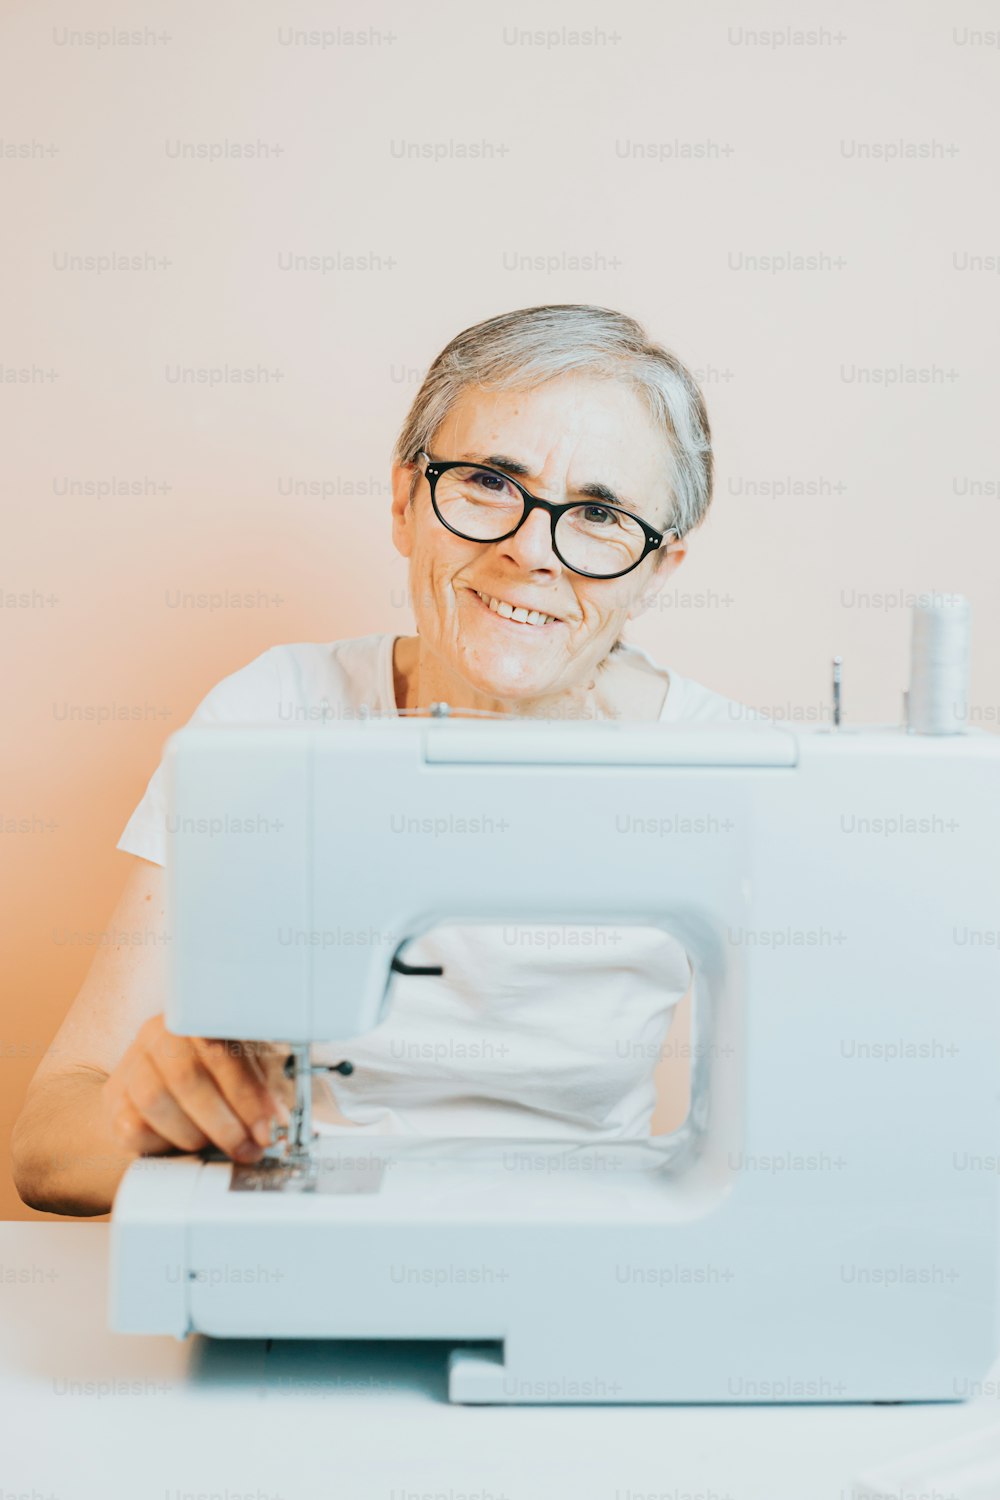 an older woman is smiling while using a sewing machine